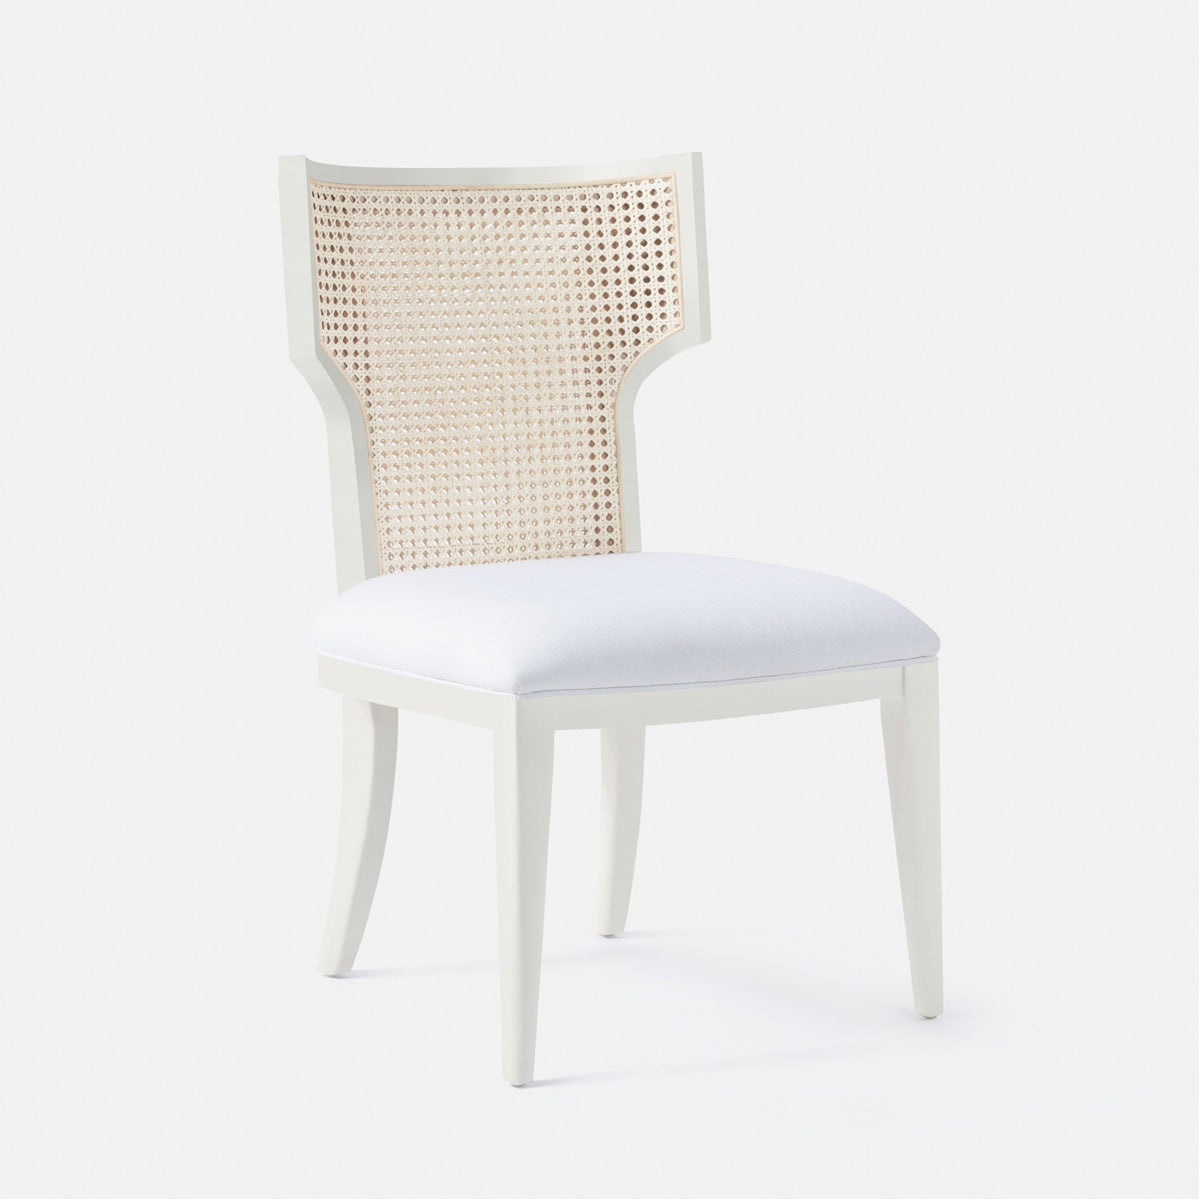 Made Goods Carleen Wingback Cane Dining Chair in Weser Fabric